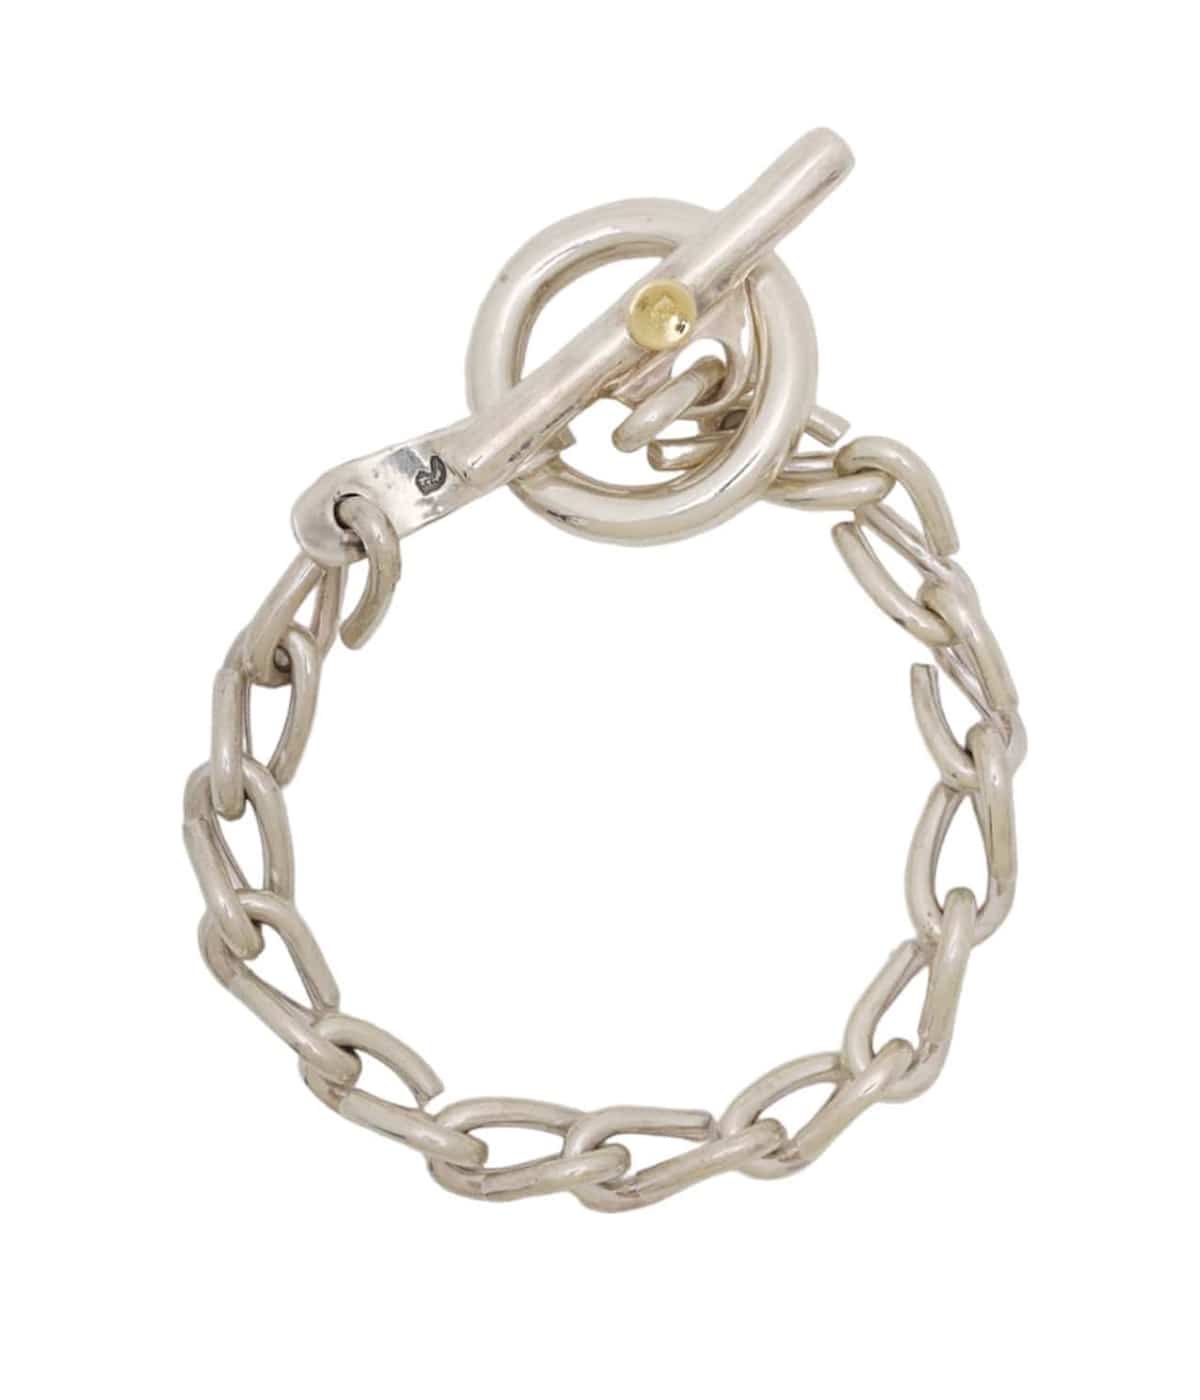 COUNTRY CHAIN BRACELET(18K GOLD ACCENT) | LARRY SMITH(ラリースミス 